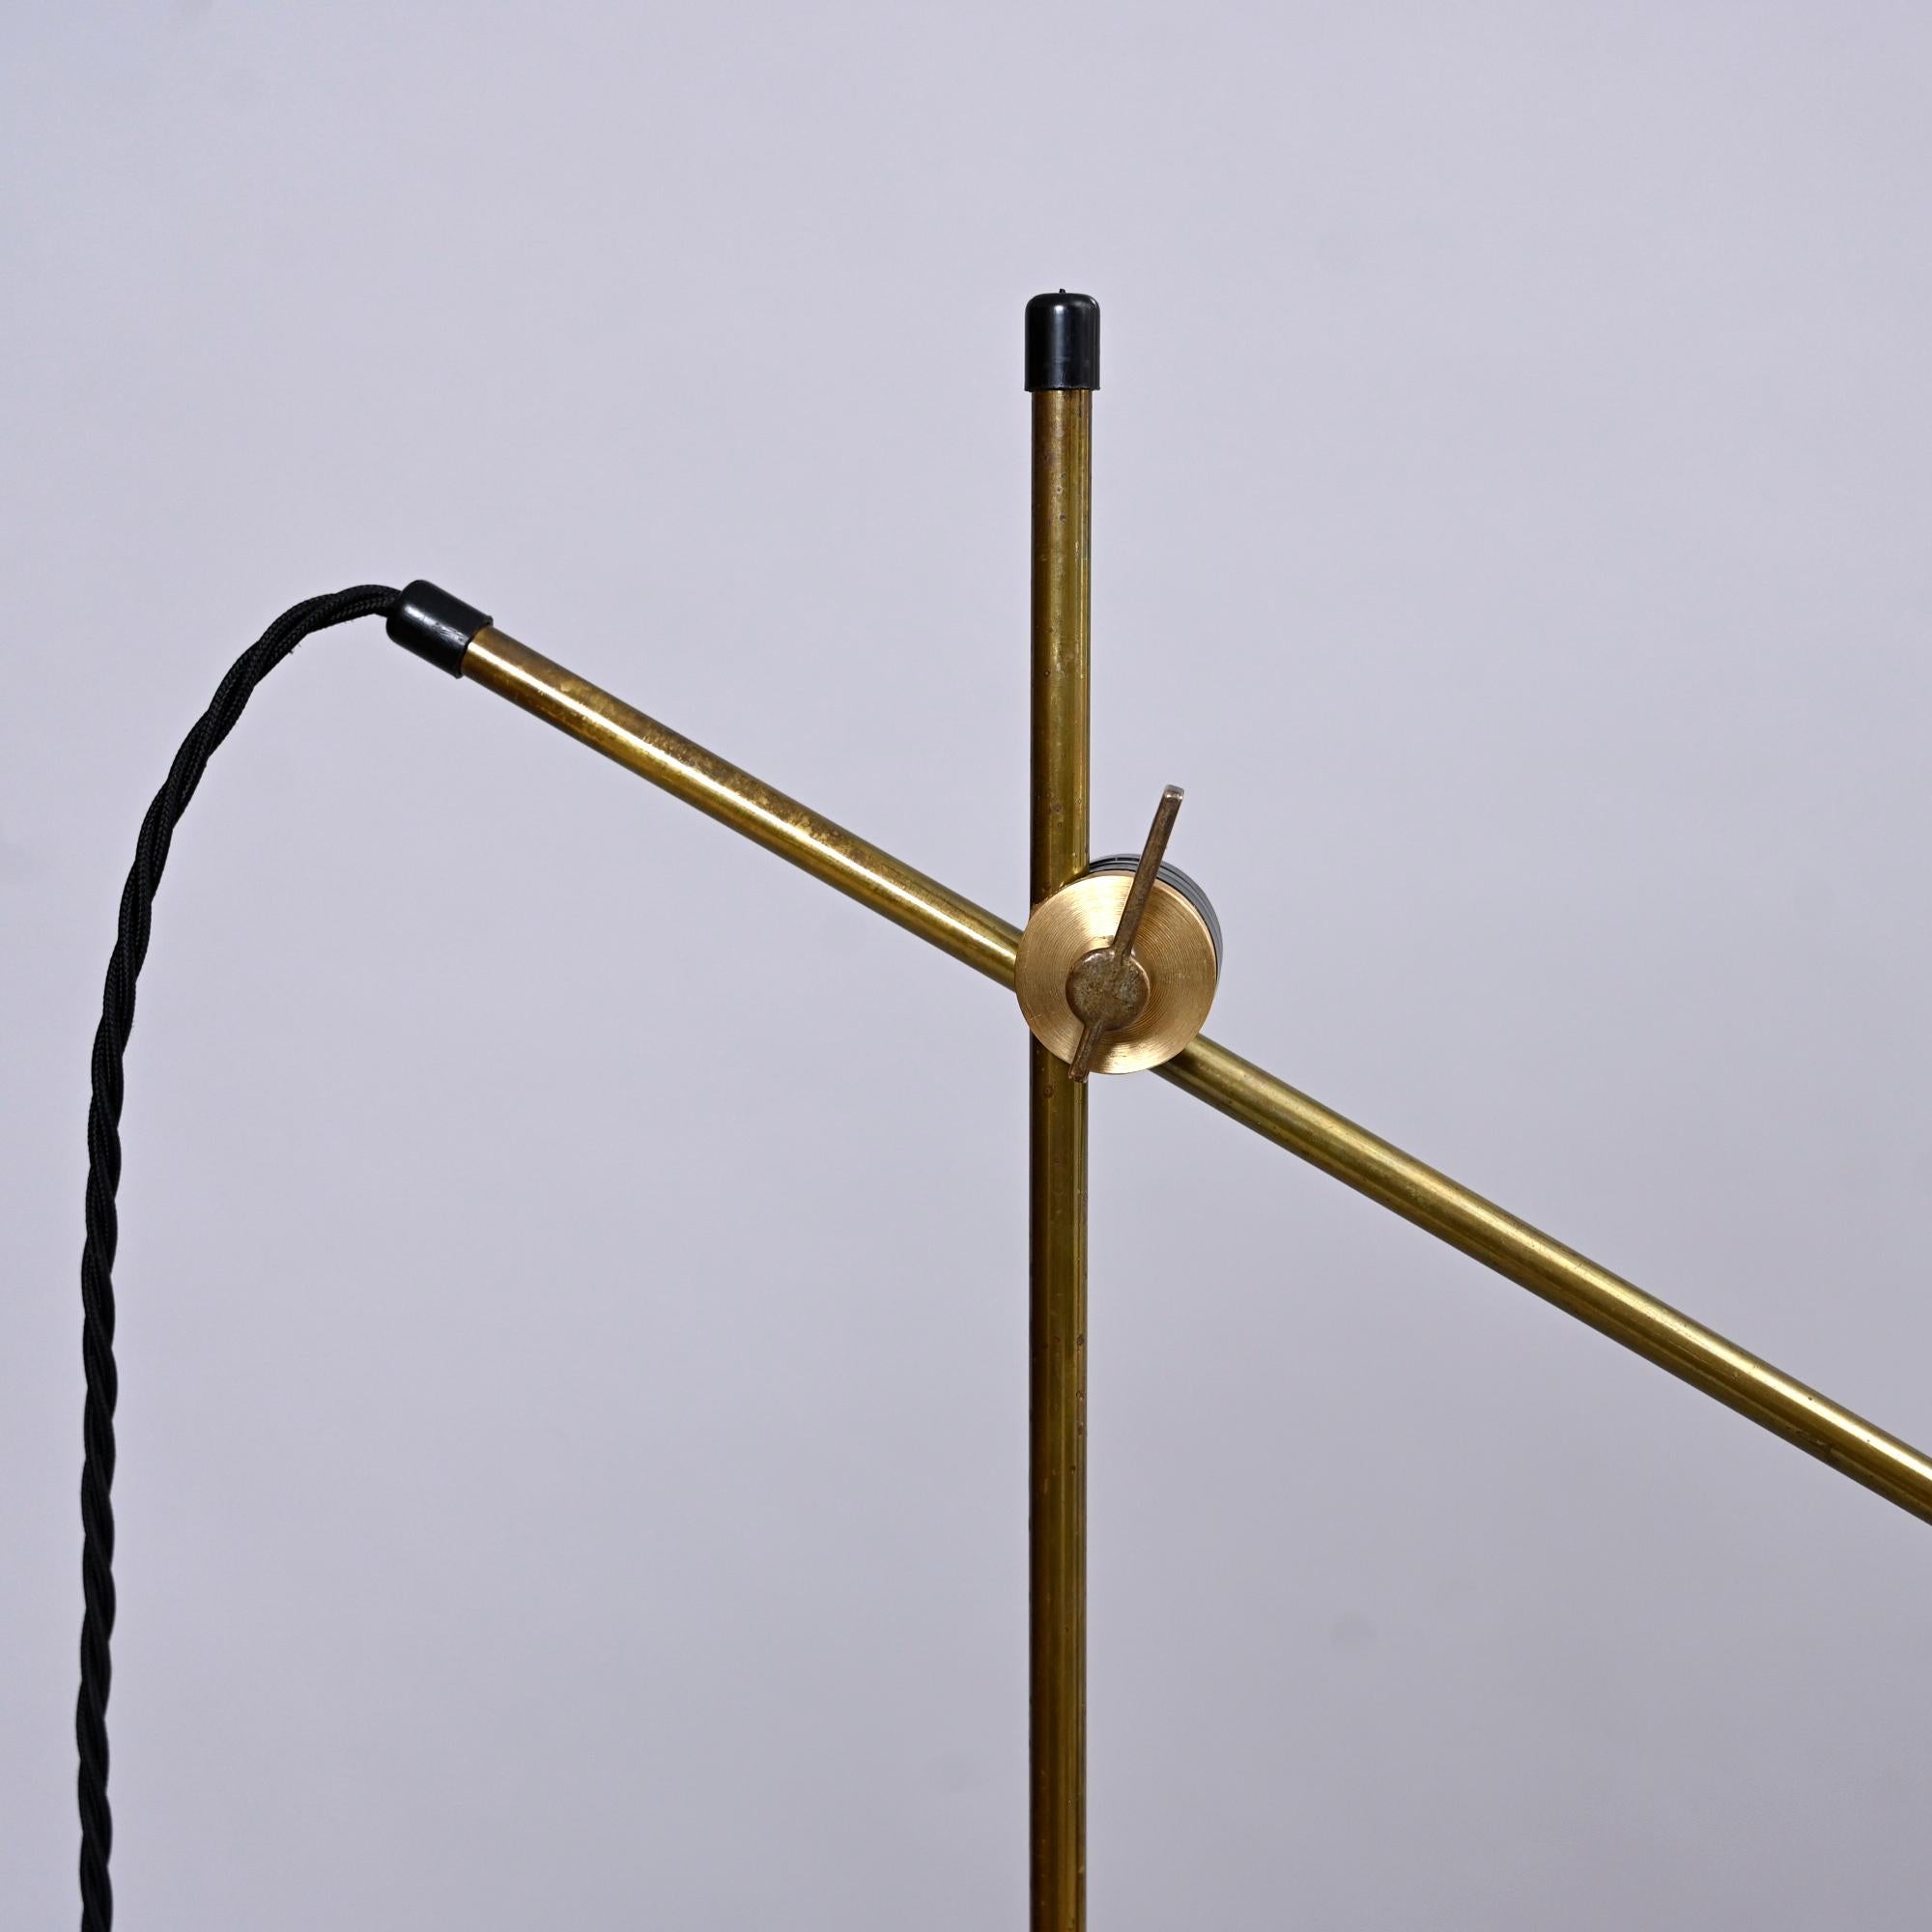 Mid-20th Century Rare English Floor Lamp by Maclamp C1950 England For Sale